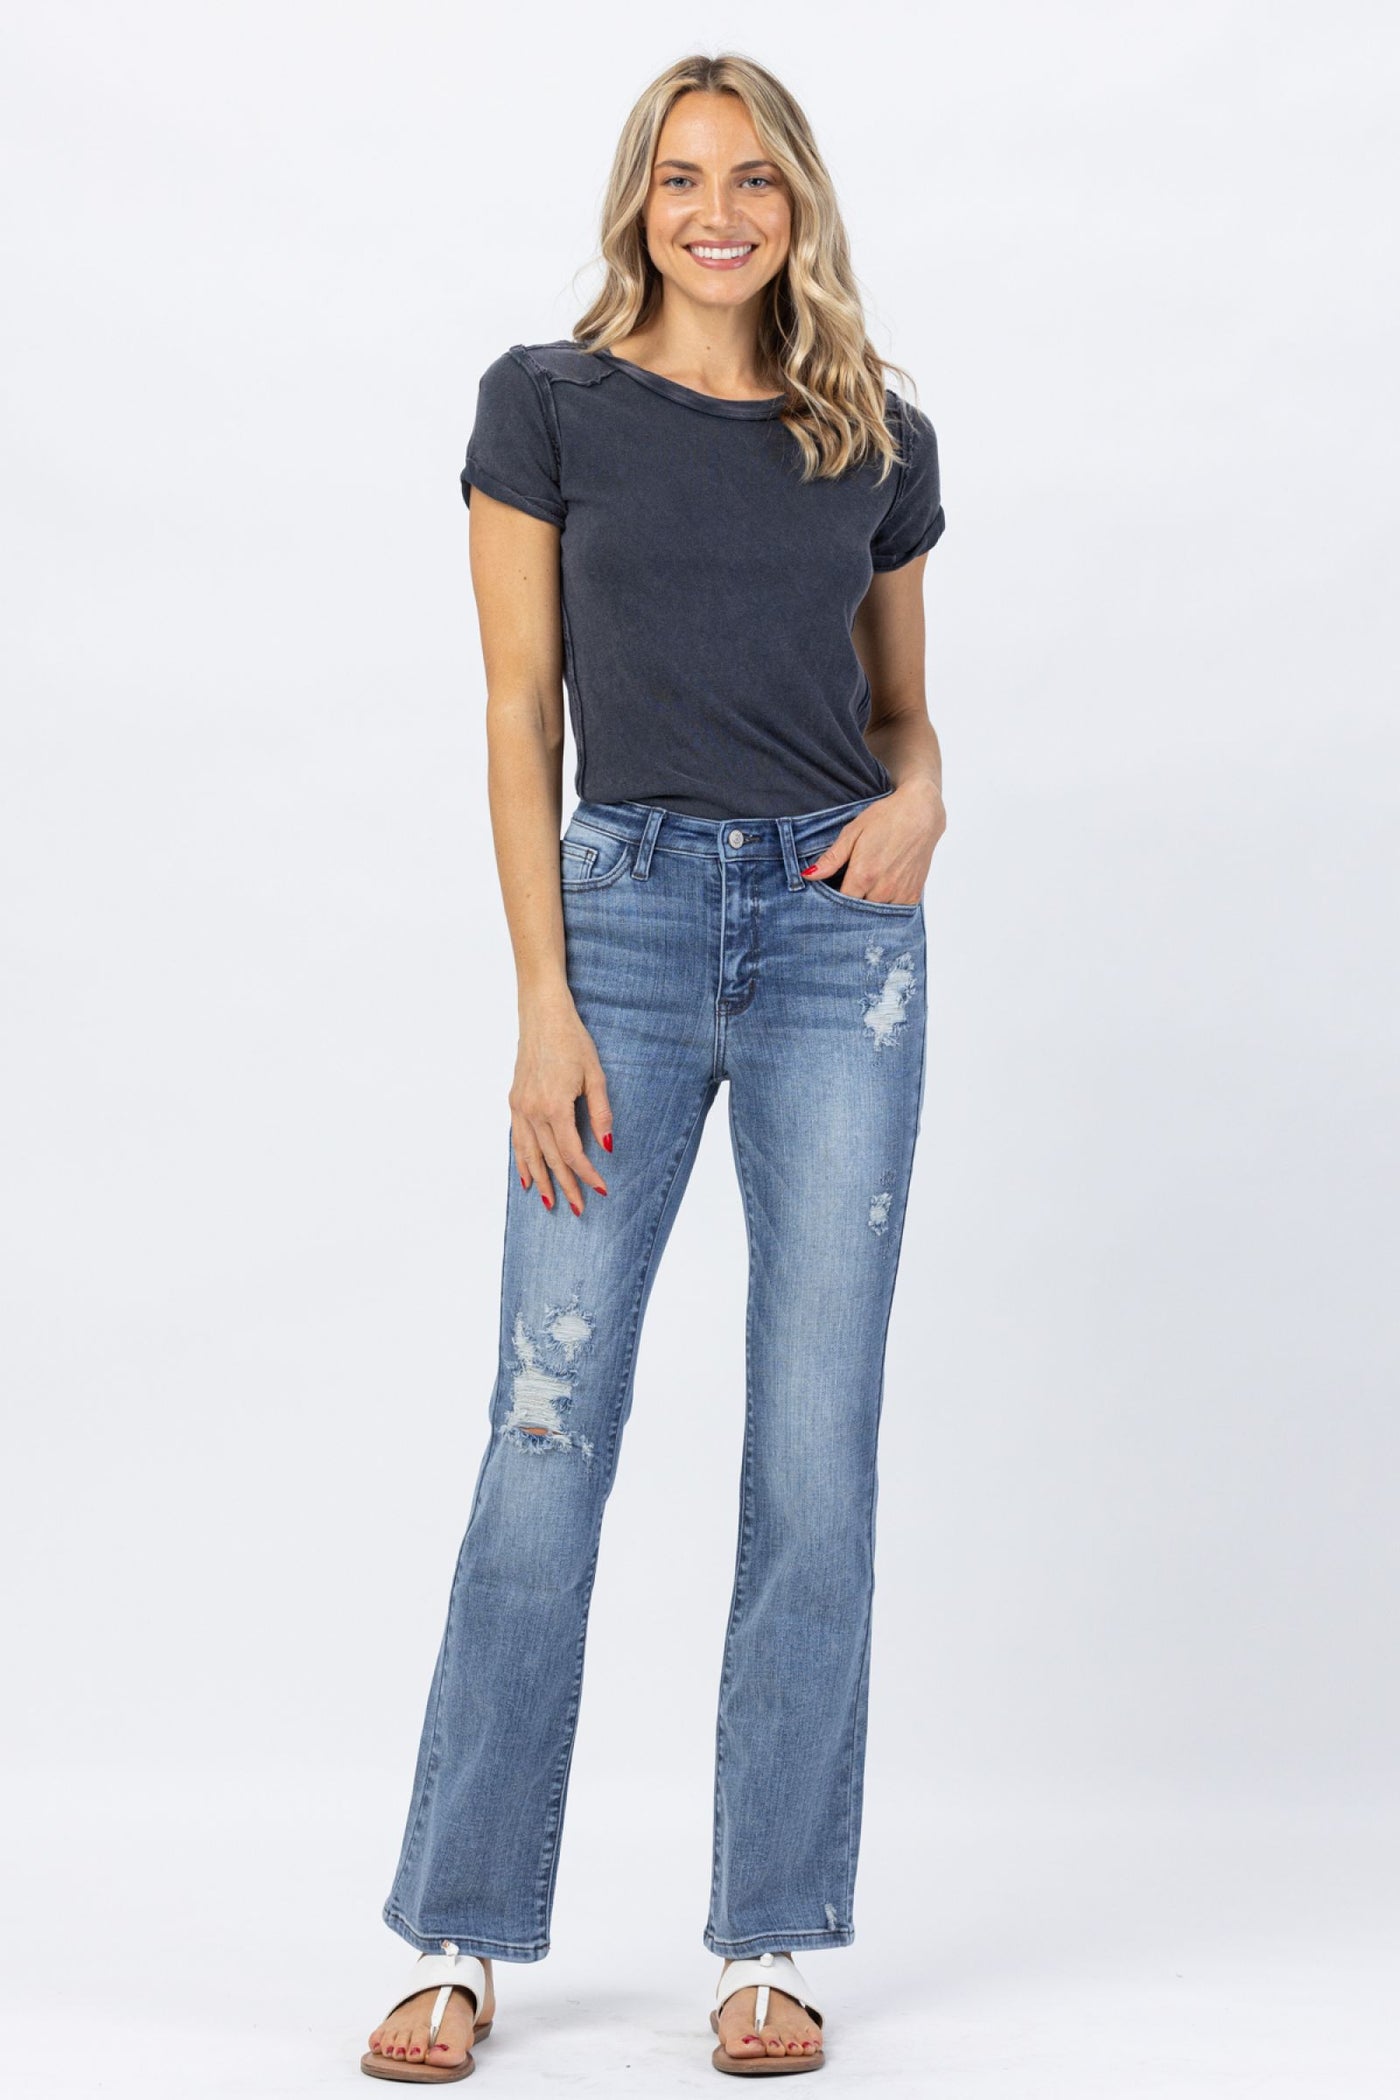 Judy Blue High Waist Boot Cut Jeans - Corinne Boutique Family Owned and Operated USA